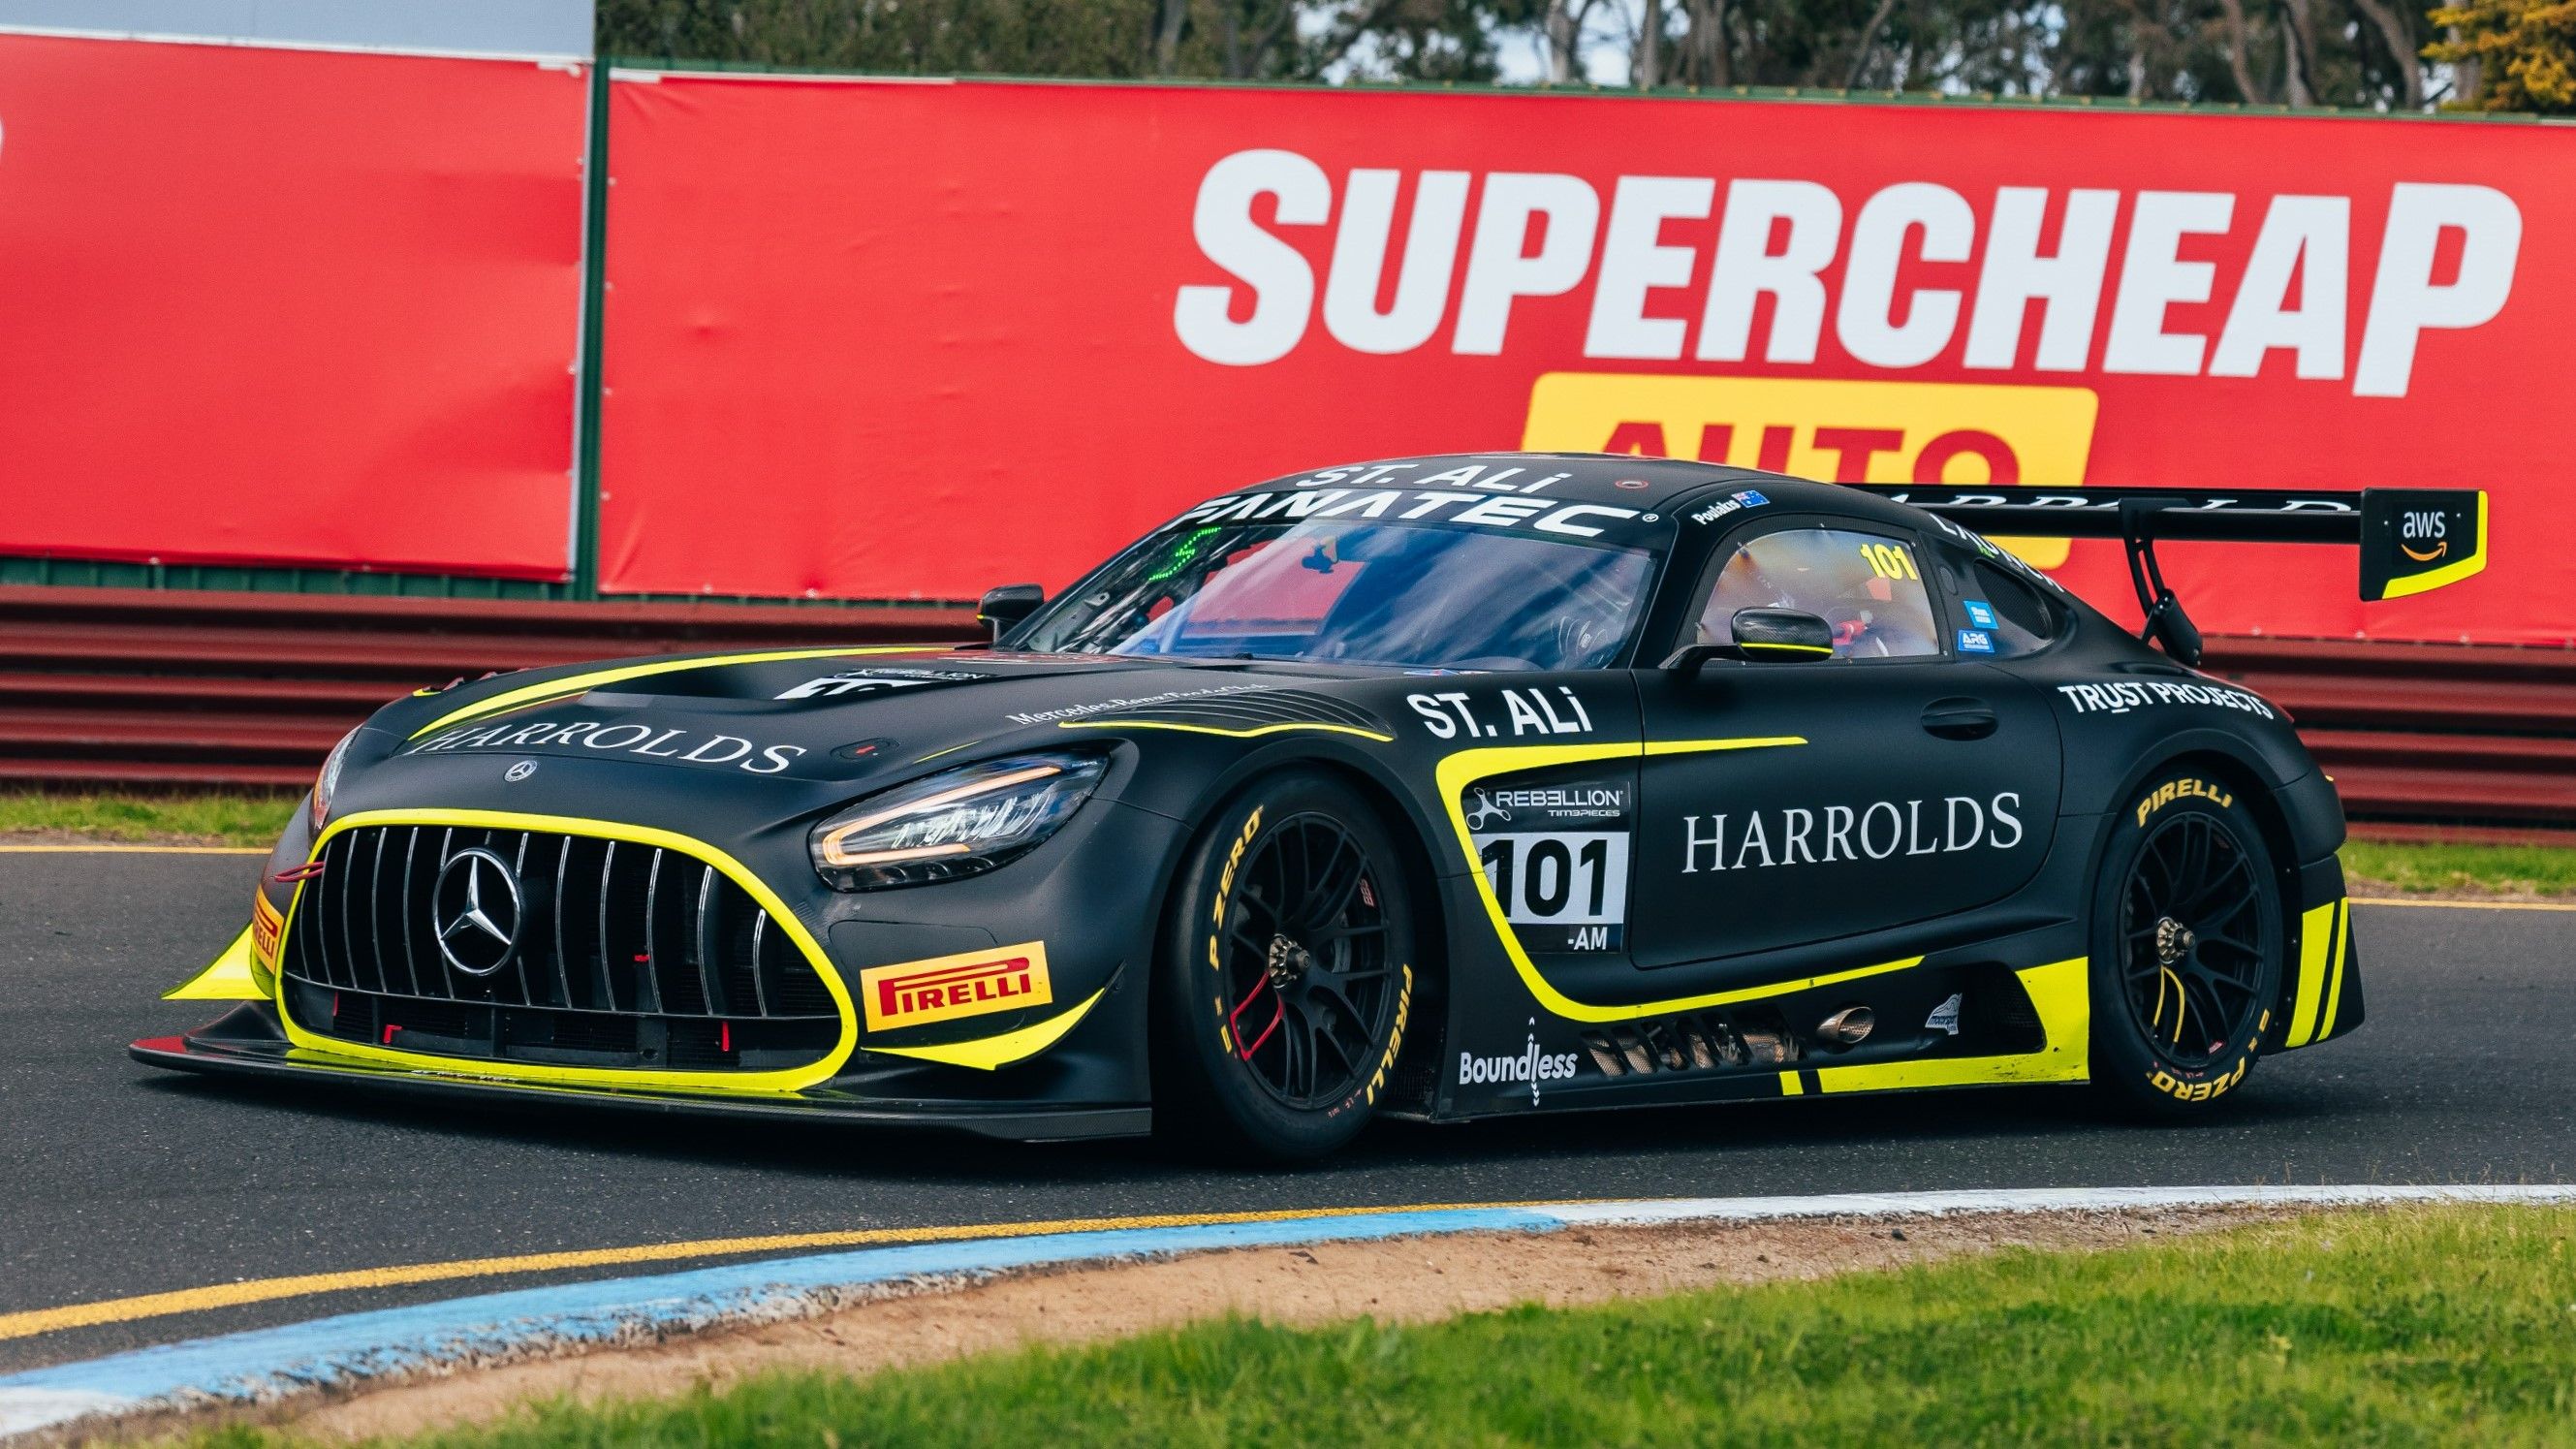 The Mercedes-AMG GT3 that Jordan Love will drive on his racing return Down Under.